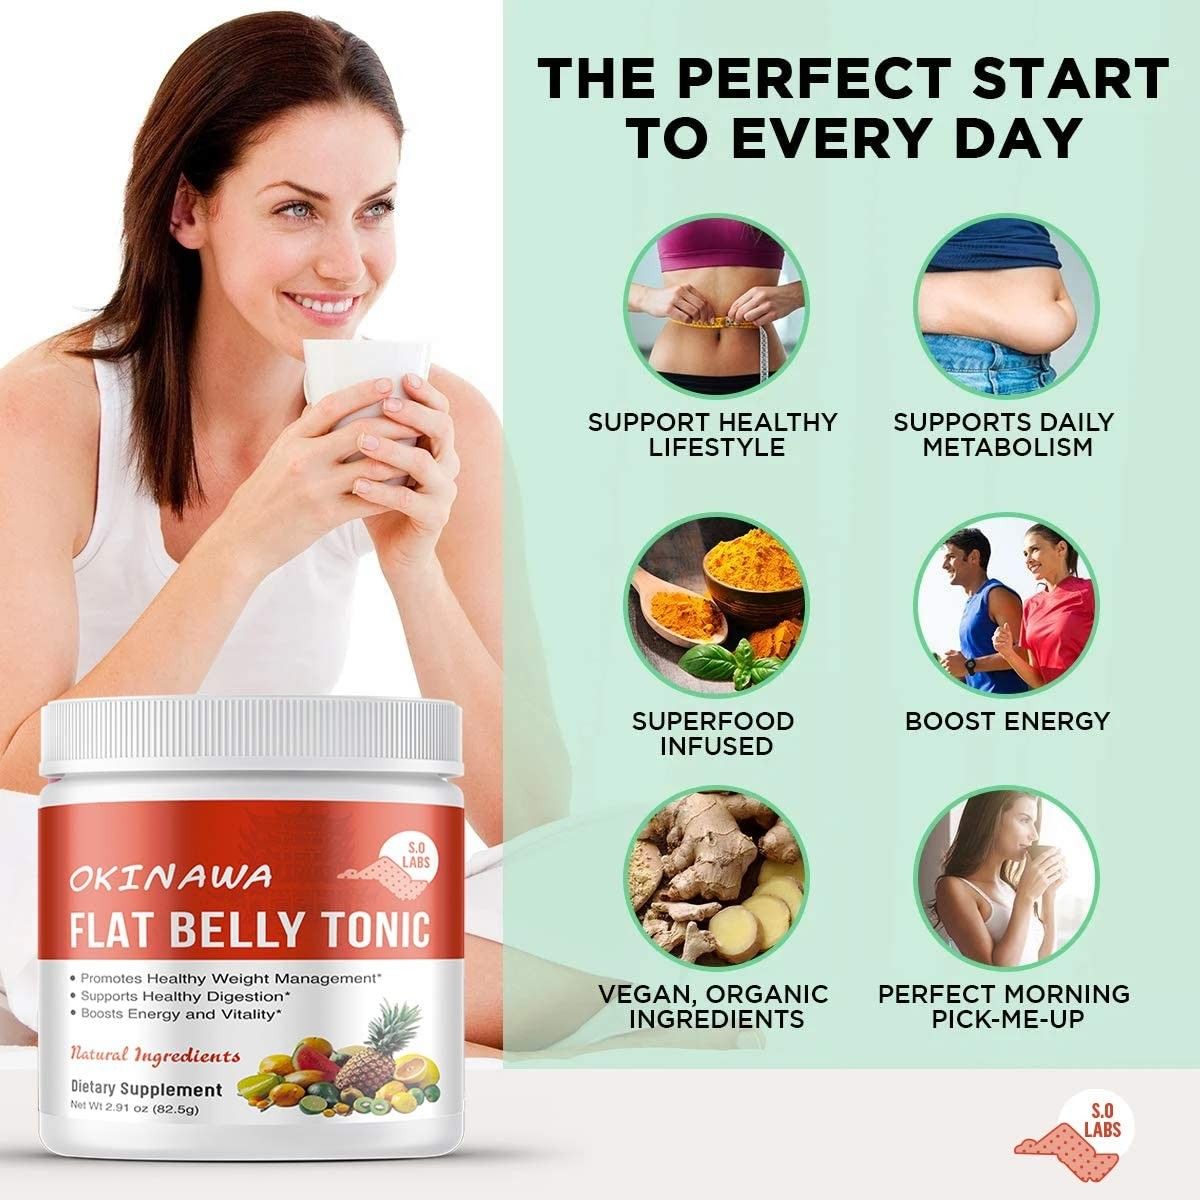 THE PERFECT START
TO EVERY DAY

- =
PD

SUPPORT HEALTHY SUPPORTS DAILY
LIFESTYLE METABOLISM

  

SUPERFOOD BOOST ENERGY
INFUSED

 

I {BELLY 1

Sun font Manager VEGAN, ORGANIC PERFECT MORNING
ra vitaiy© INGREDIENTS PICK-ME-UP

y -
Ingredients i
tietary supplement gl oe
or =51

  

, ids

Ly